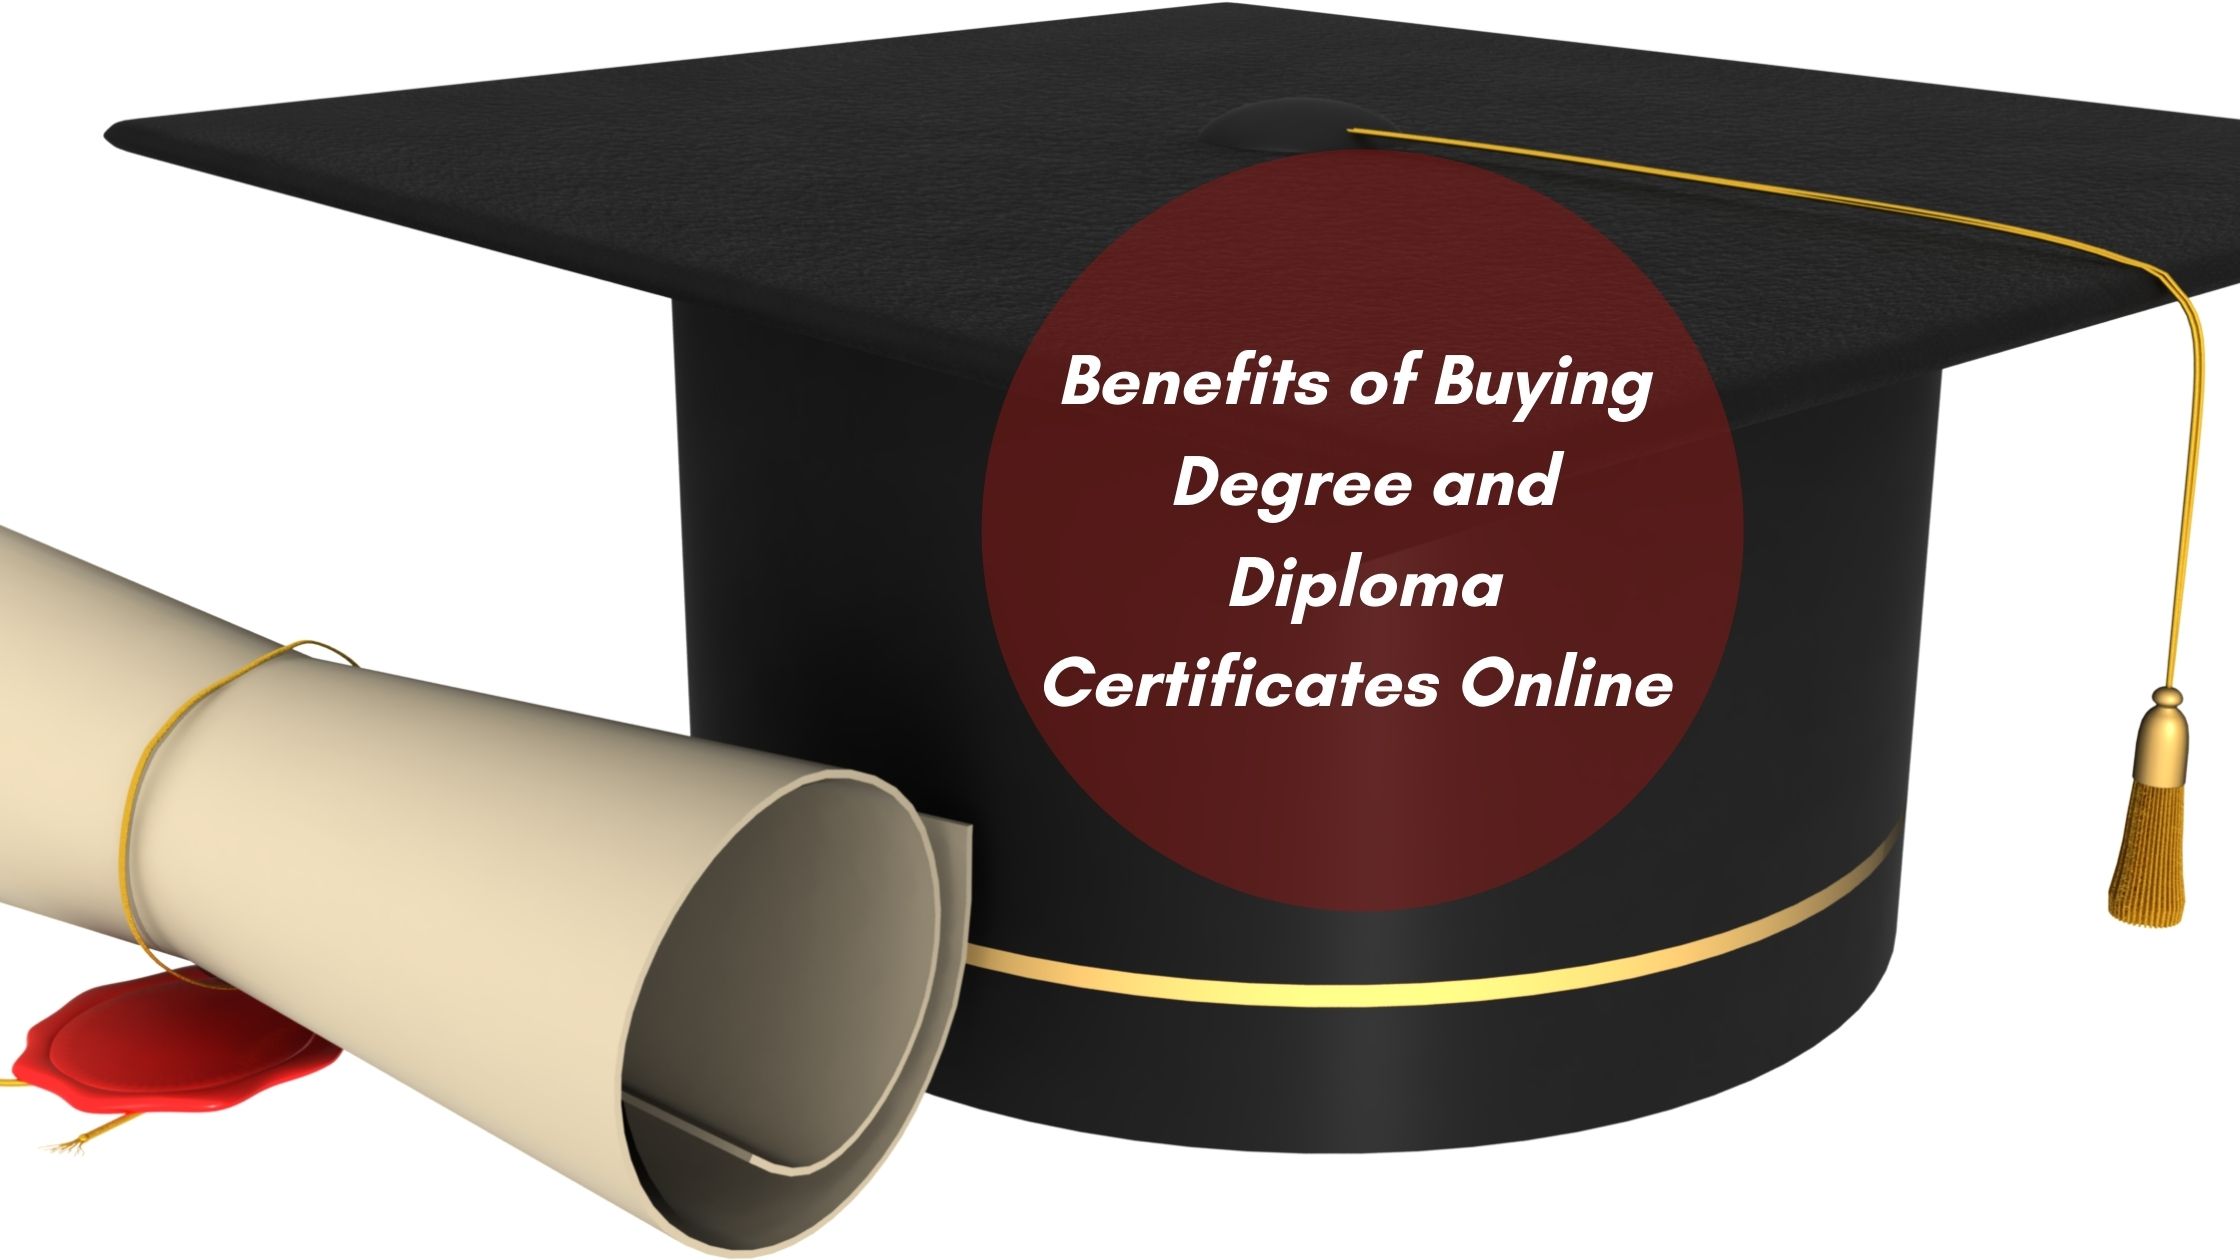 Benefits of Buying Degree and Diploma Certificates Online